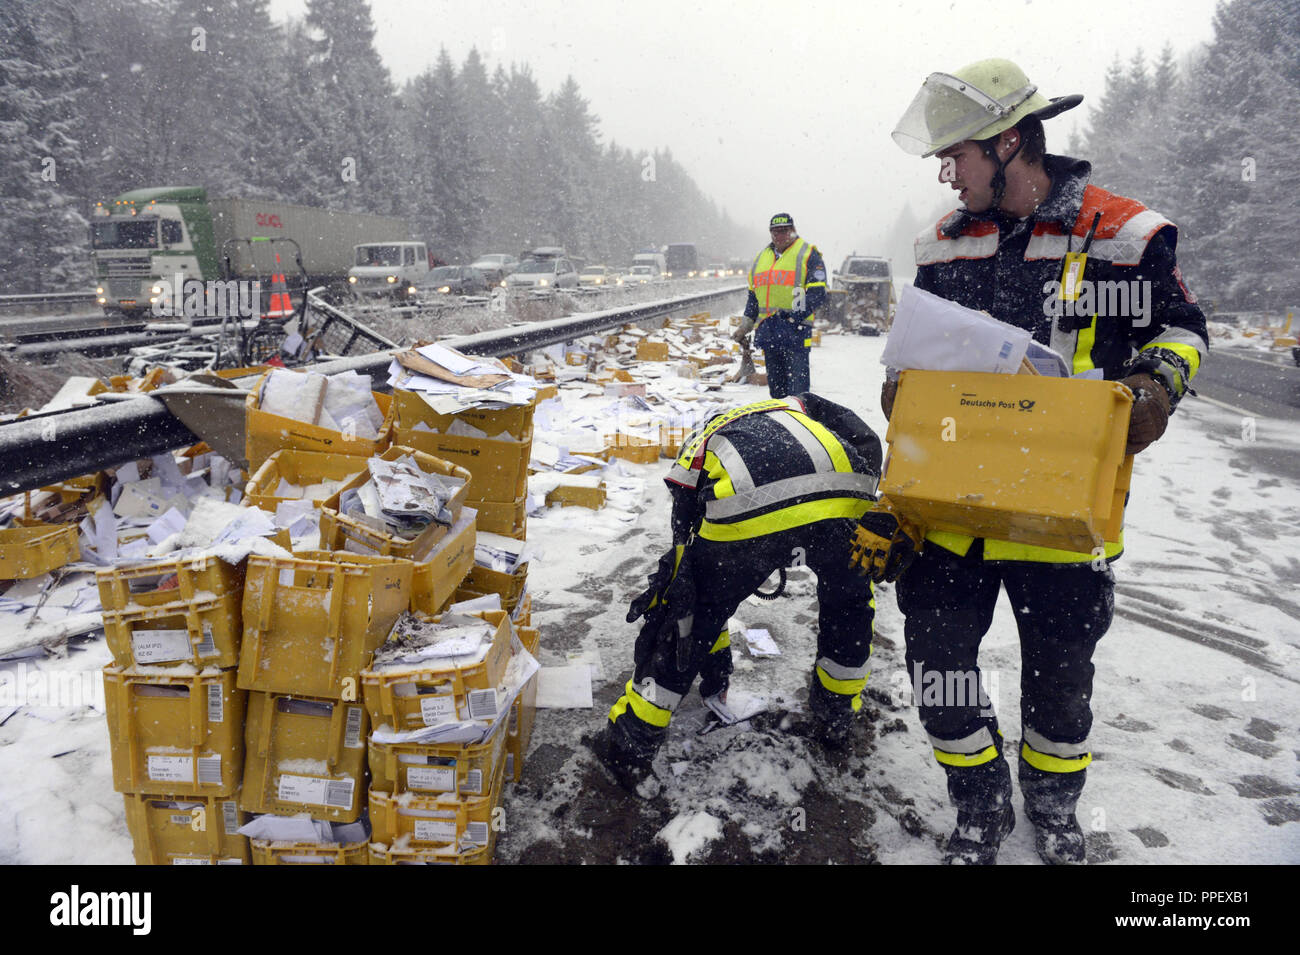 Truck accident on the A8 towards Salzburg: a mail truck with parcels and letters skidded, crashed and the entire load scattered over the A8. Towards Salzburg there is a total barrier, the fire department of Brunnthal and Hofolding are on site, alerting the THW to collect the mail soaked from snow. Stock Photo